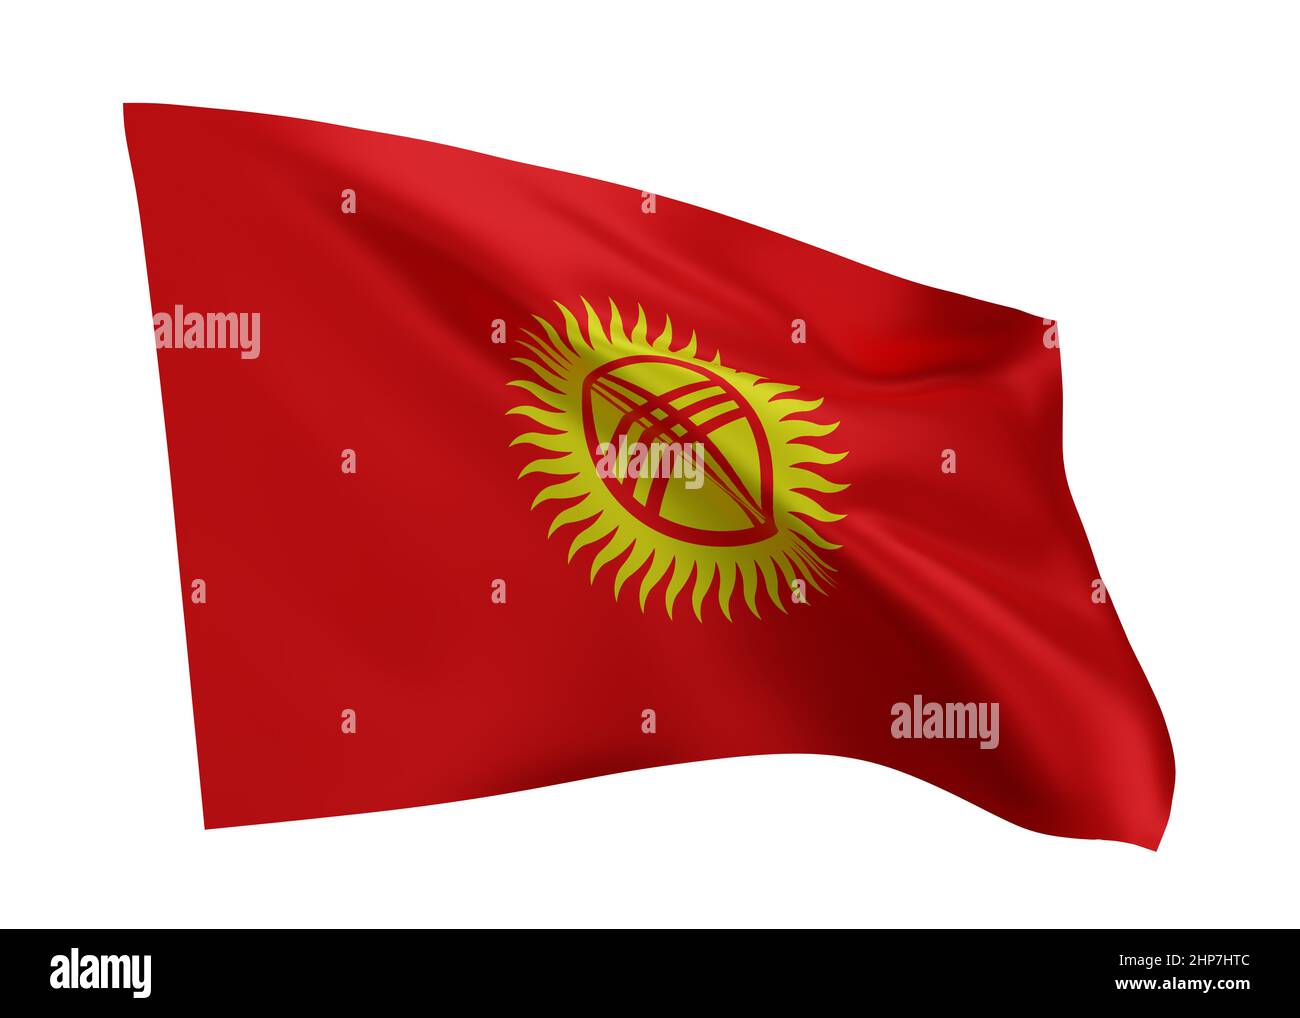 3d illustration flag of Kyrgyzstan. Kyrgyz republic high resolution flag isolated against white background. 3d rendering Stock Photo